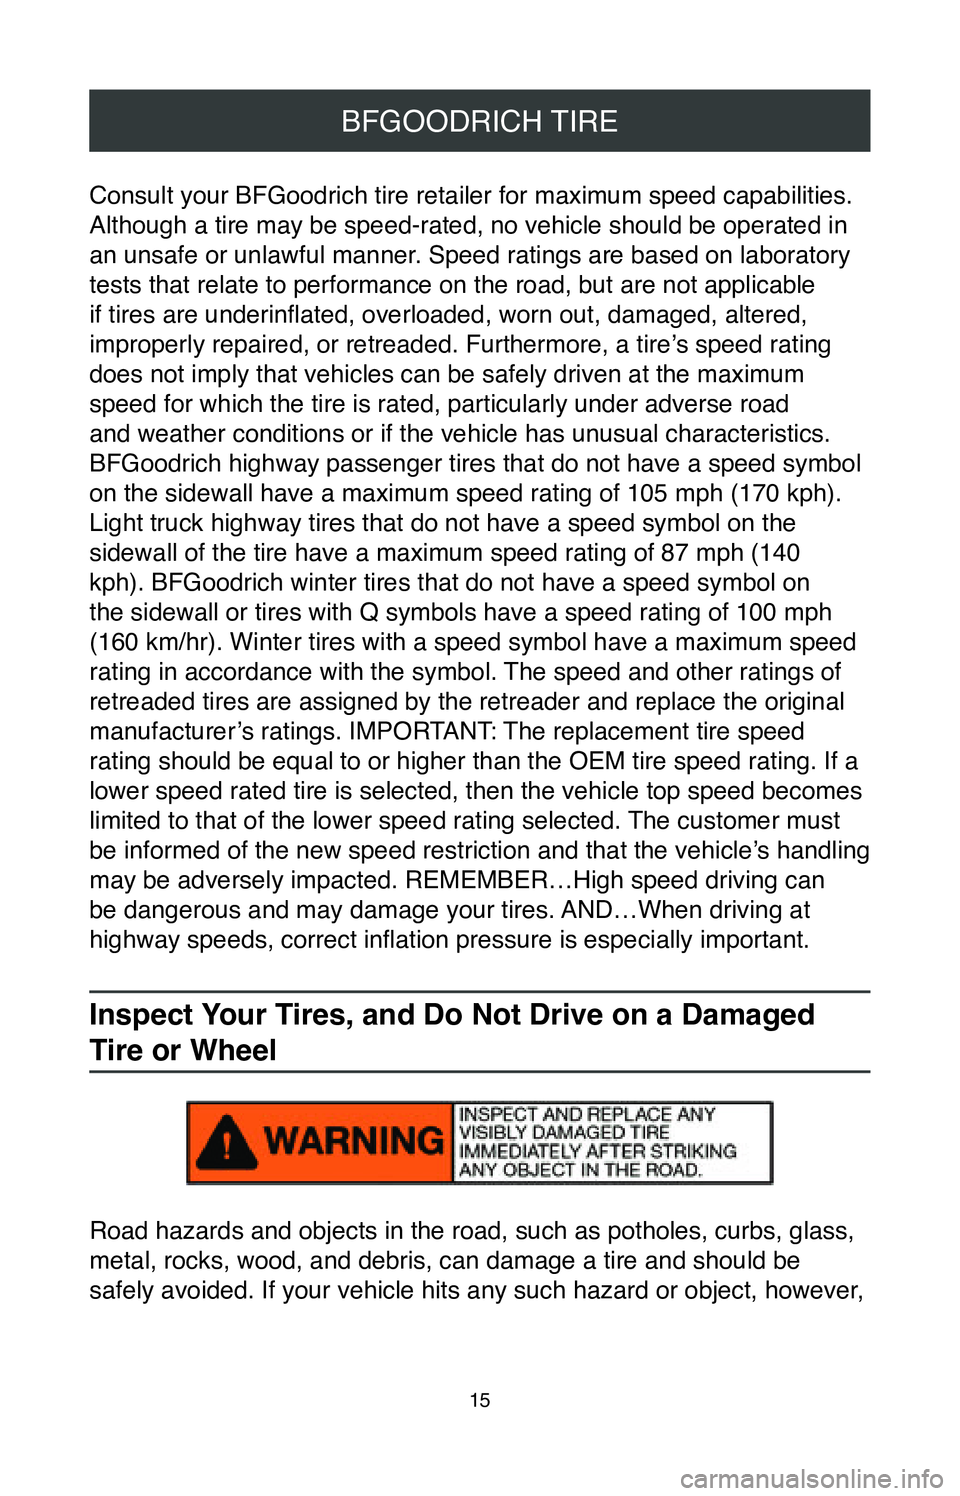 TOYOTA COROLLA HATCHBACK 2020  Warranties & Maintenance Guides (in English) 15
BFGOODRICH TIRE
Consult your BFGoodrich tire retailer for maximum speed capabilities. 
Although a tire may be speed-rated, no vehicle should be operated in 
an unsafe or unlawful manner. Speed rati